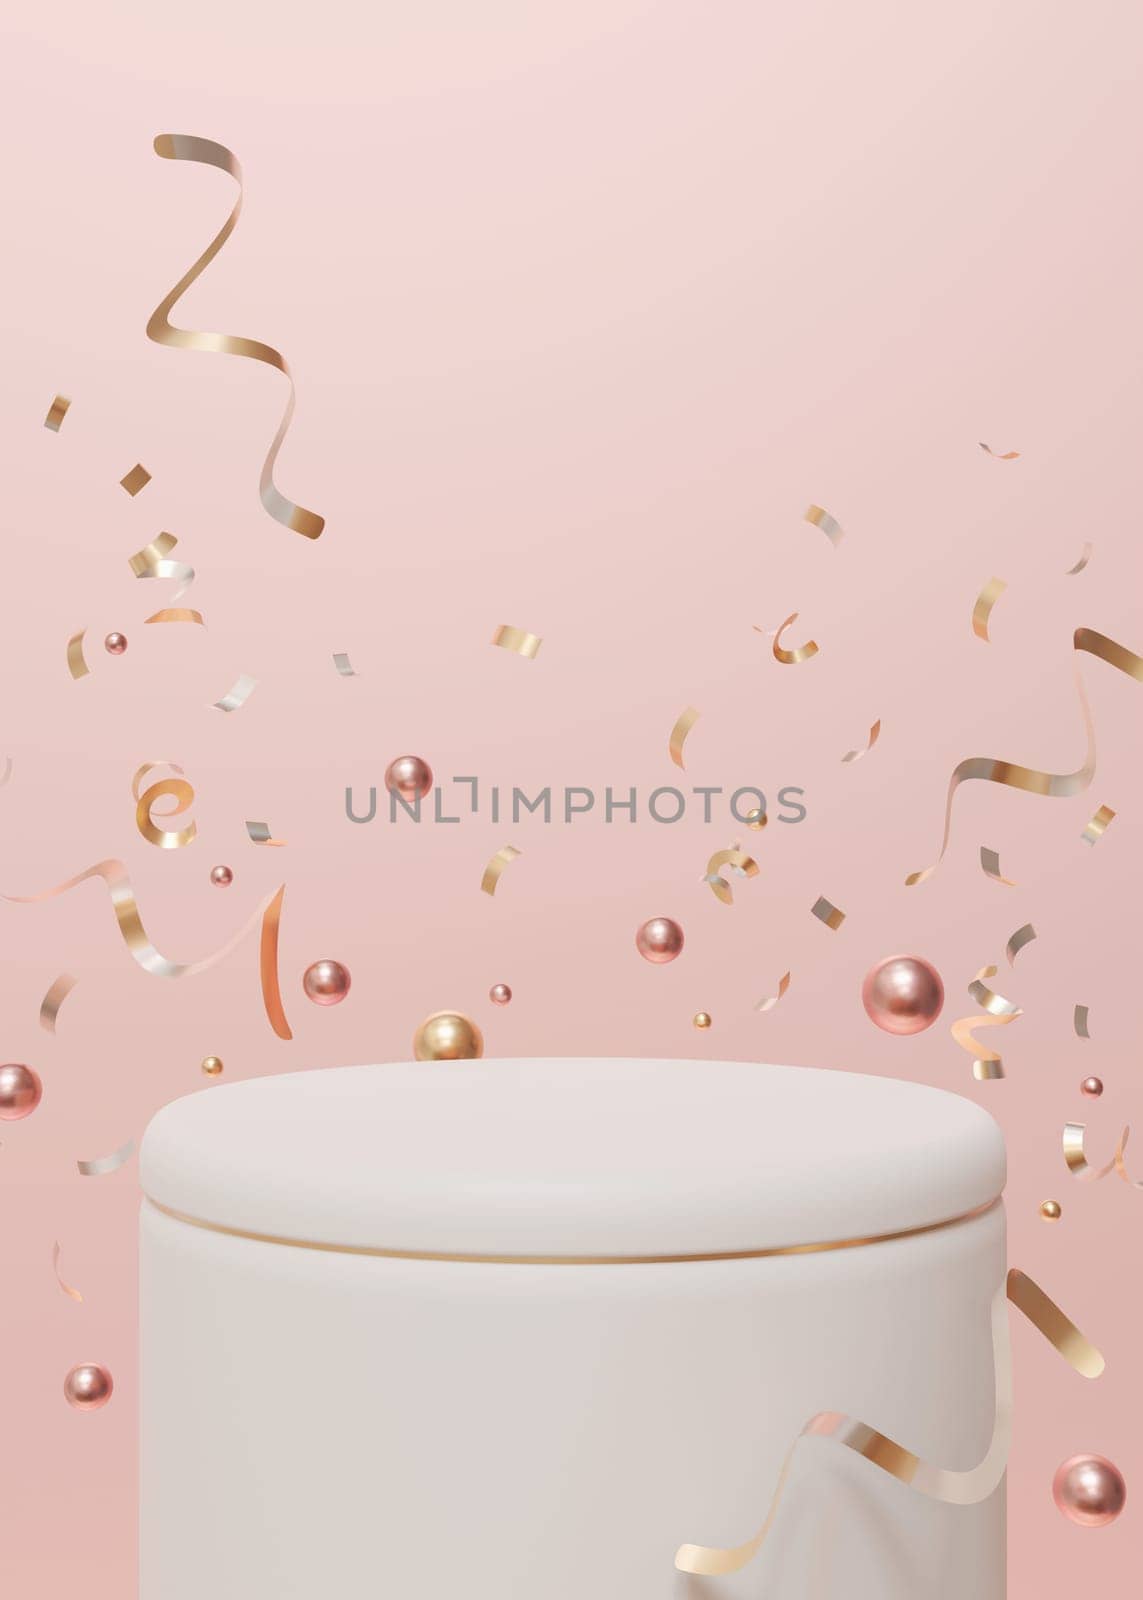 Elegant soft pink vertical background with pedestal adorned with gold rim, surrounded by floating golden confetti and pearls, ideal for showcasing products, luxury events, celebratory visuals. 3D